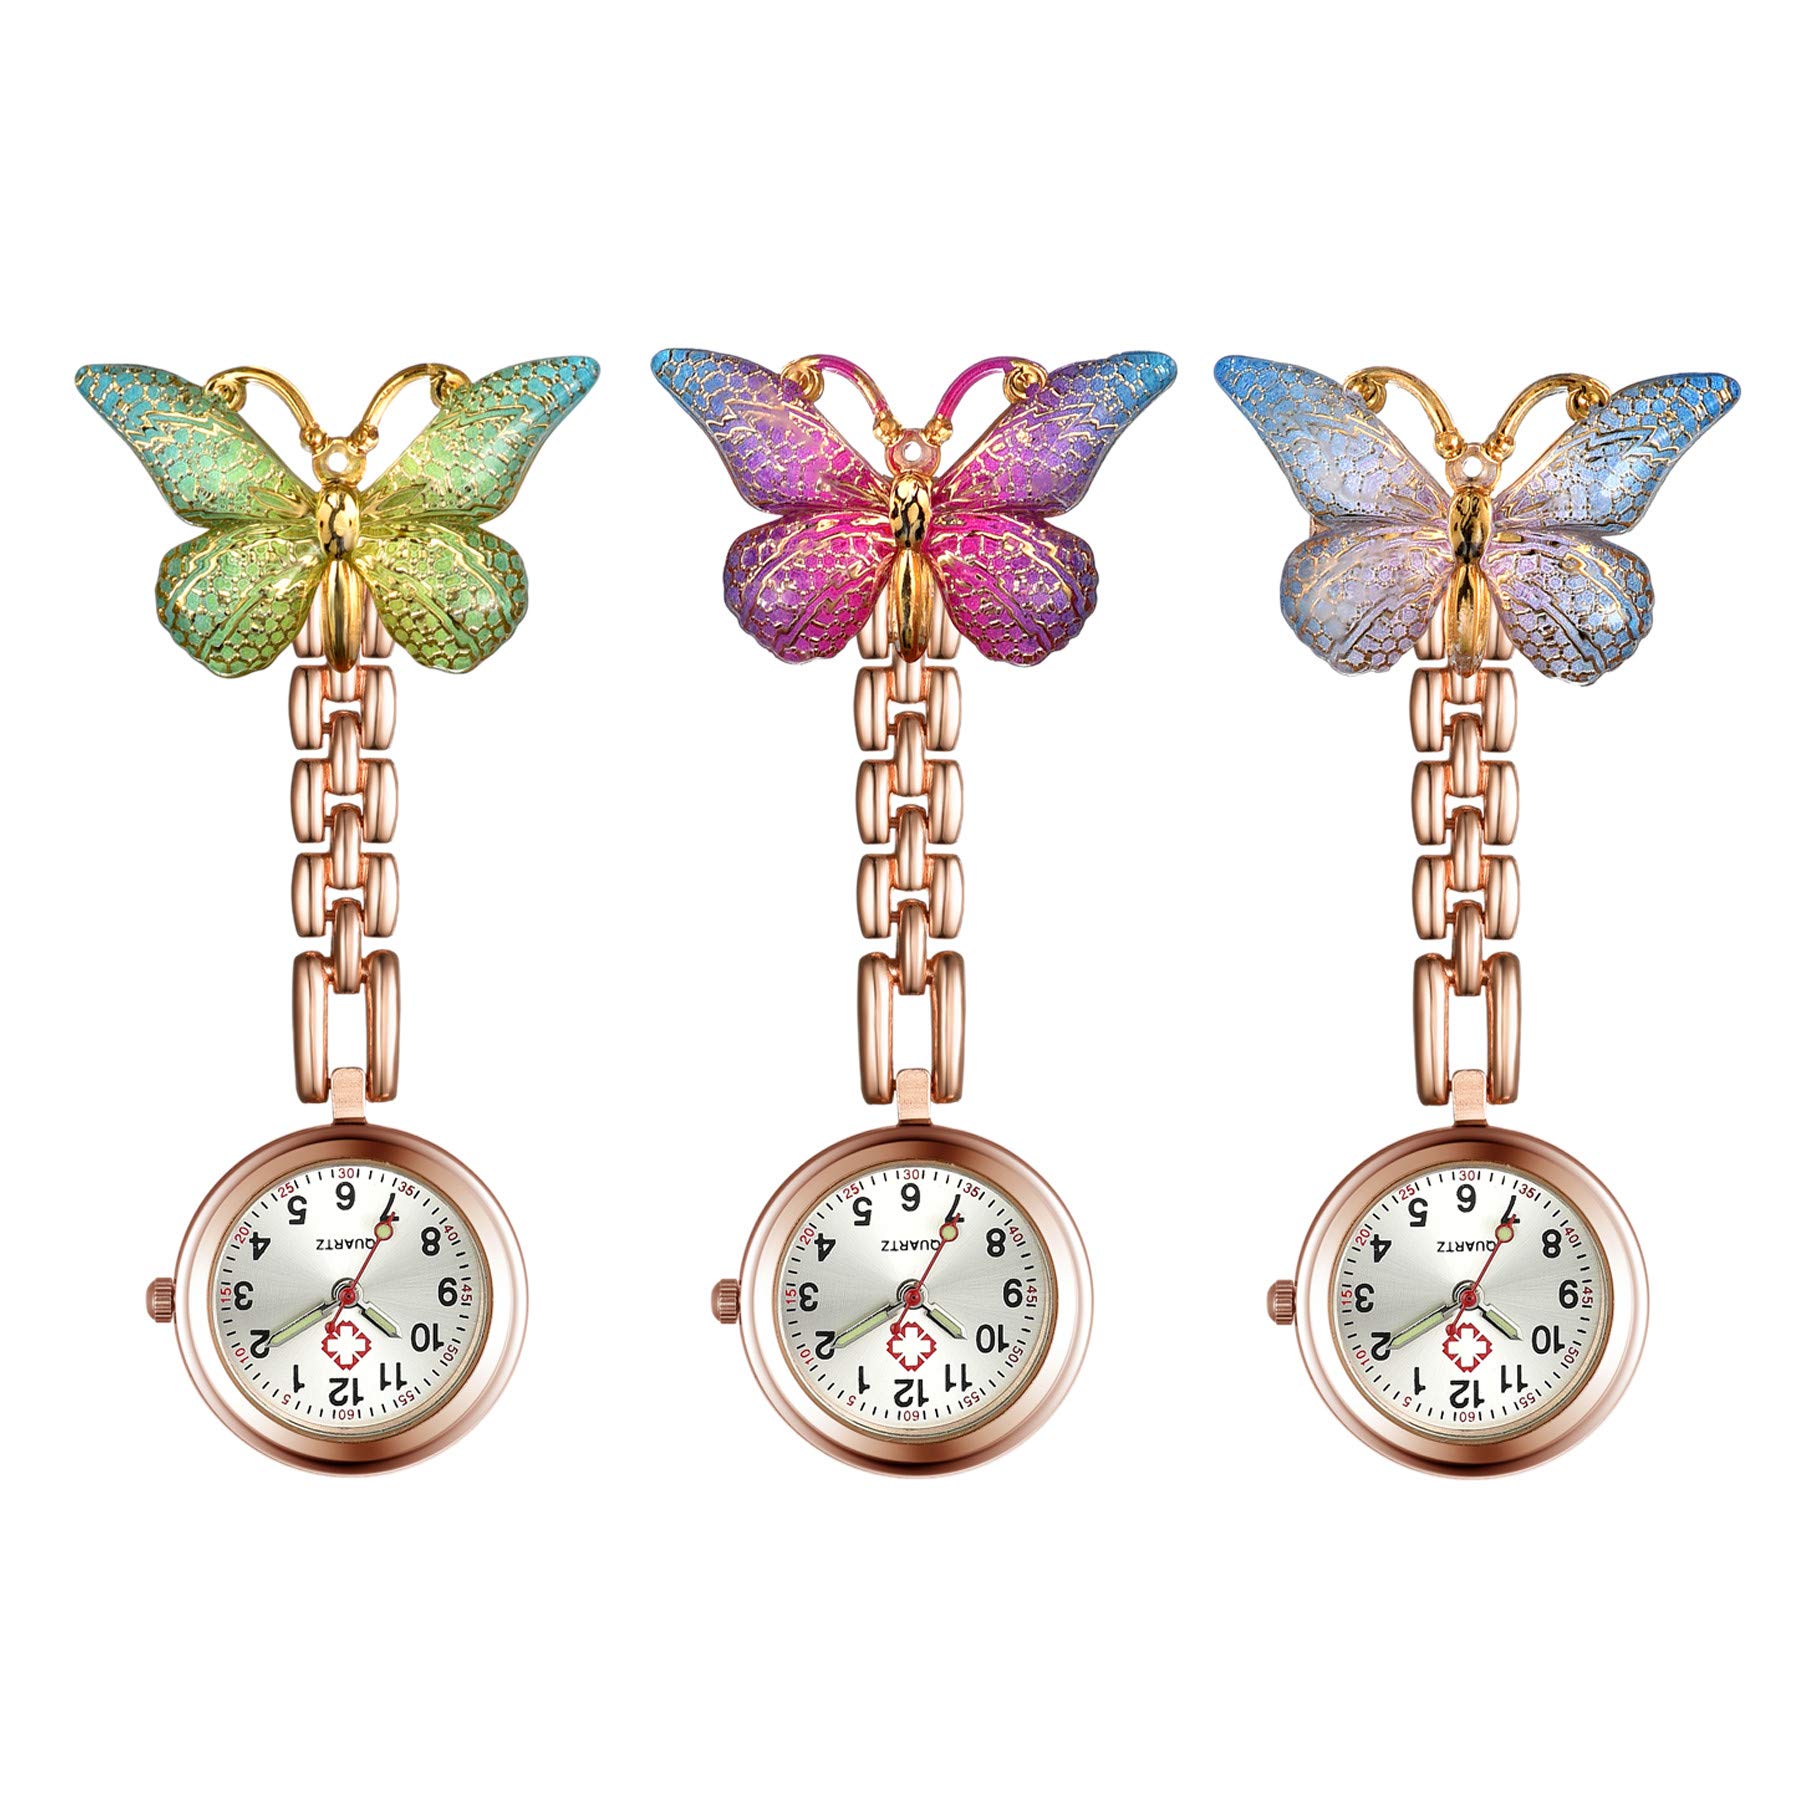 1-3 Pack Women Girl Butterfly Brooch Nurse Watch Pin-On with Secondhand Stethoscope Lapel Fob Pocket Badge Watches for Doctor Nurse Easy to Read